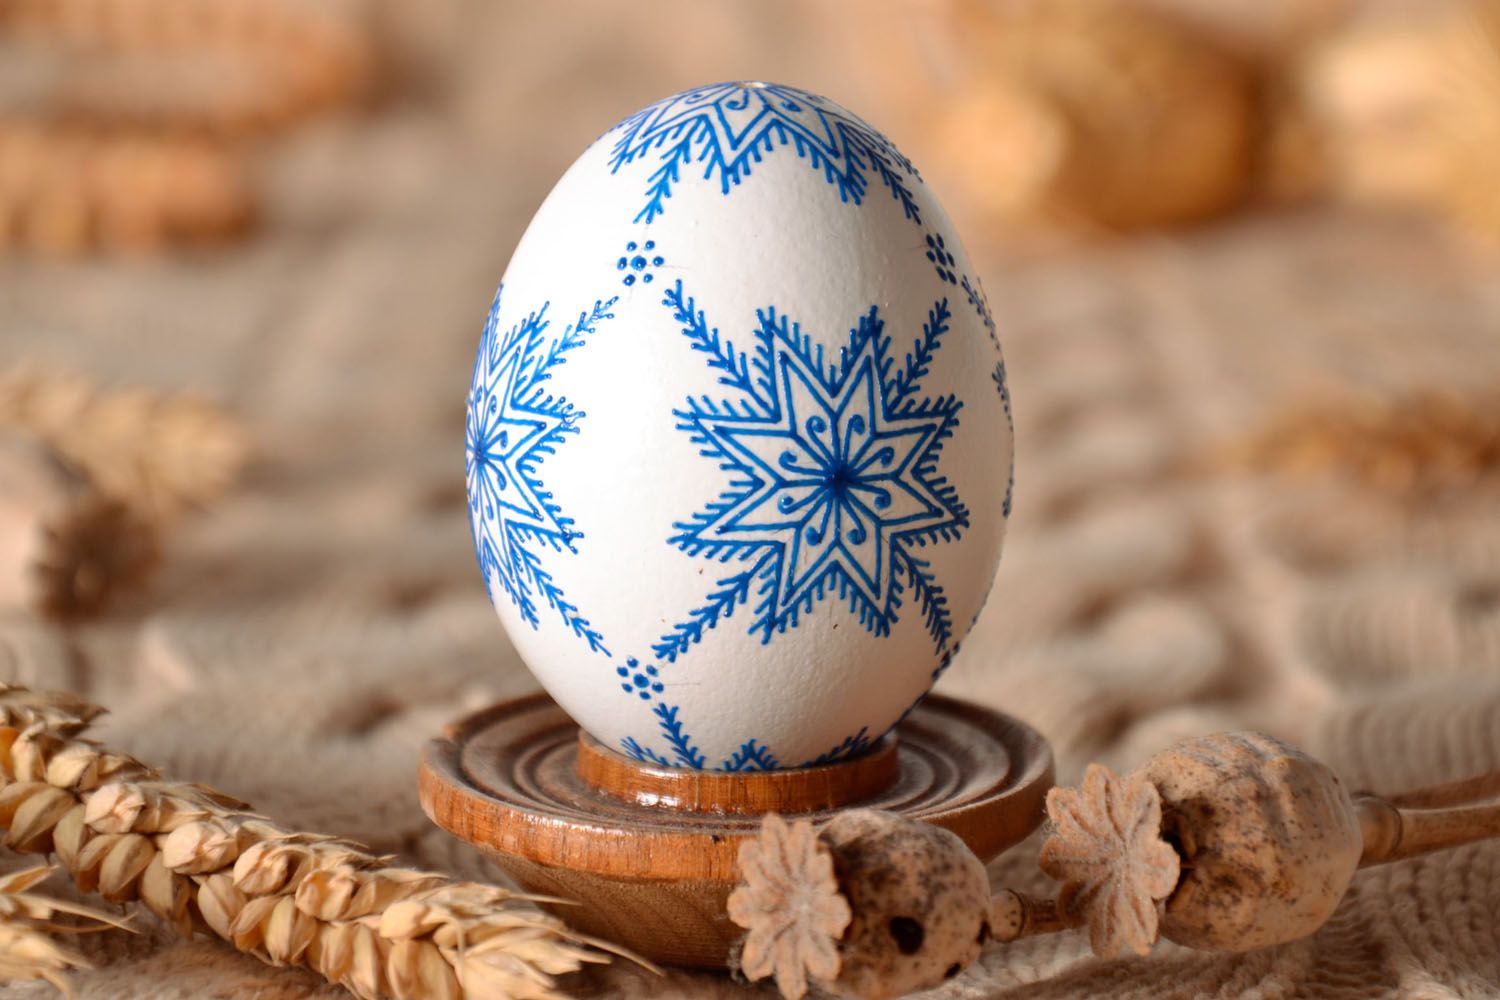 New Year's painted egg photo 1